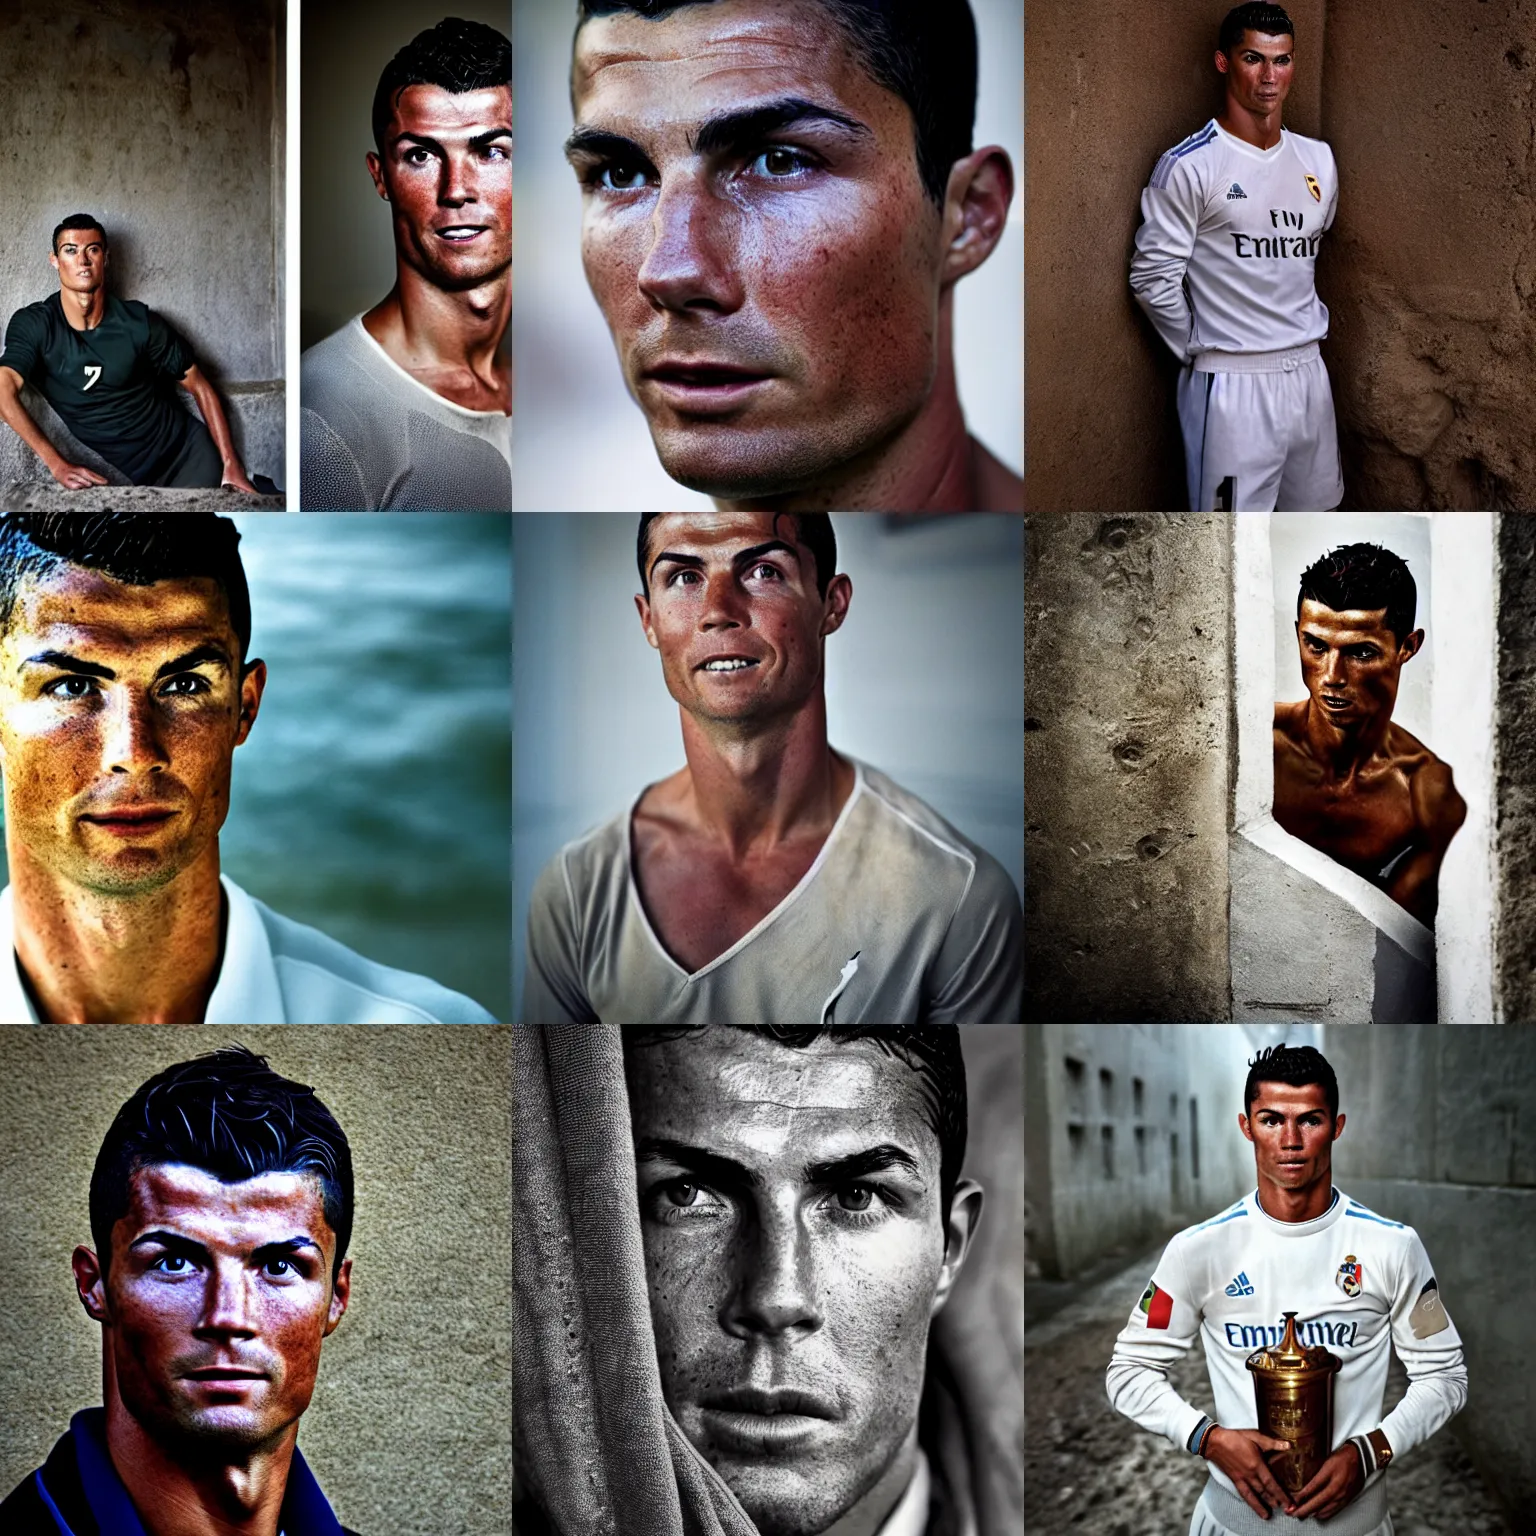 Prompt: portrait of Cristiano Ronaldo by Steve McCurry, clean, detailed, award-winning